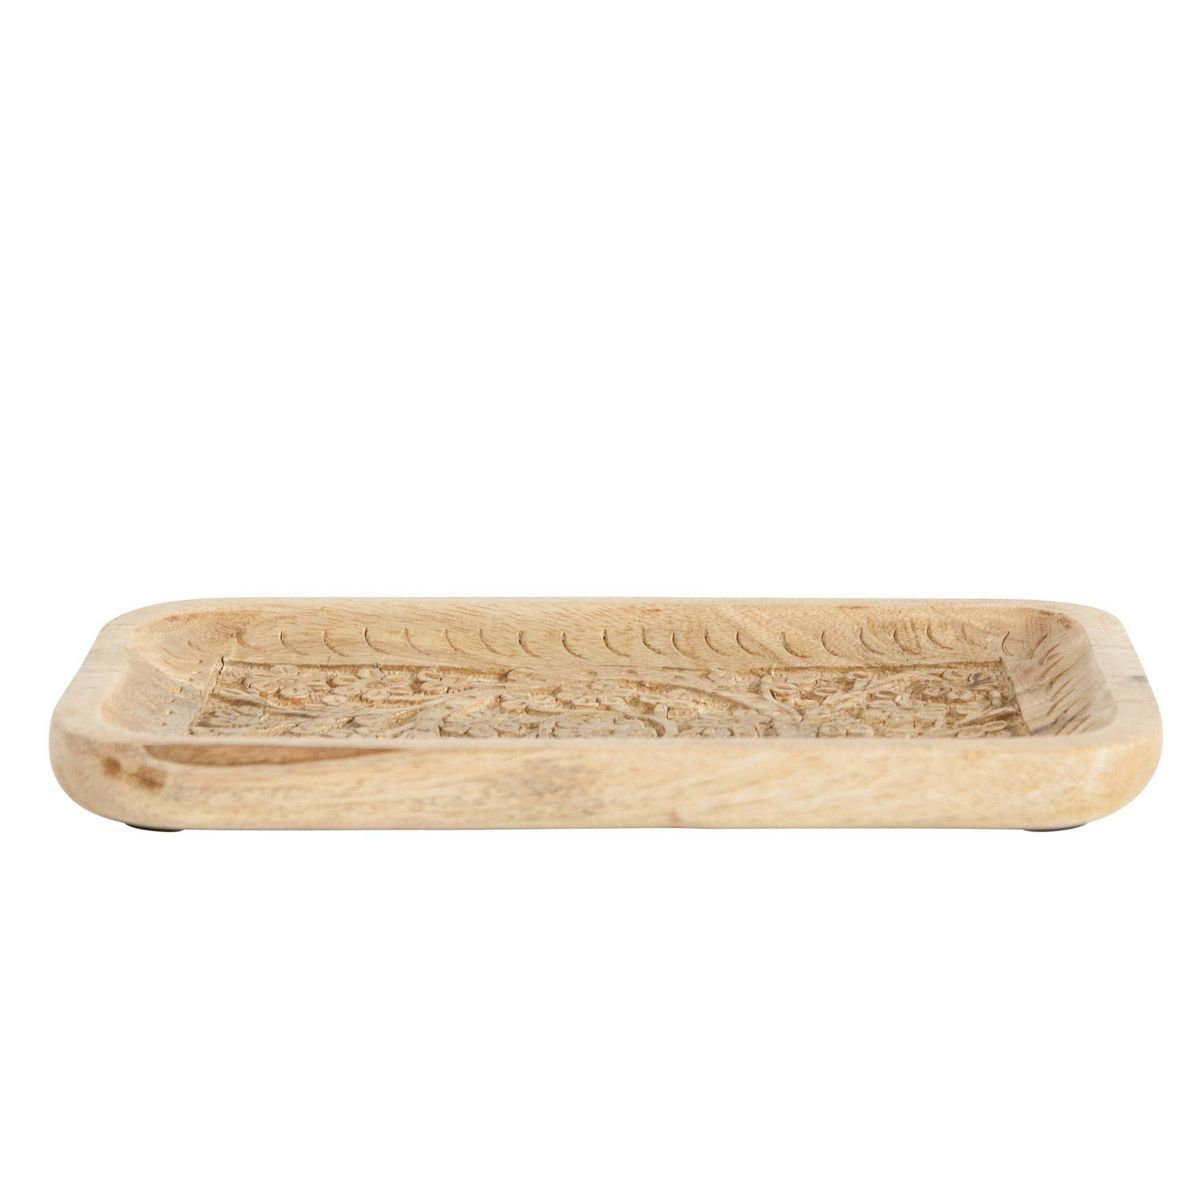 10" x 6" Handcarved Mango Wood Tray with Intricate Floral Designs Natural - Storied Home | Target